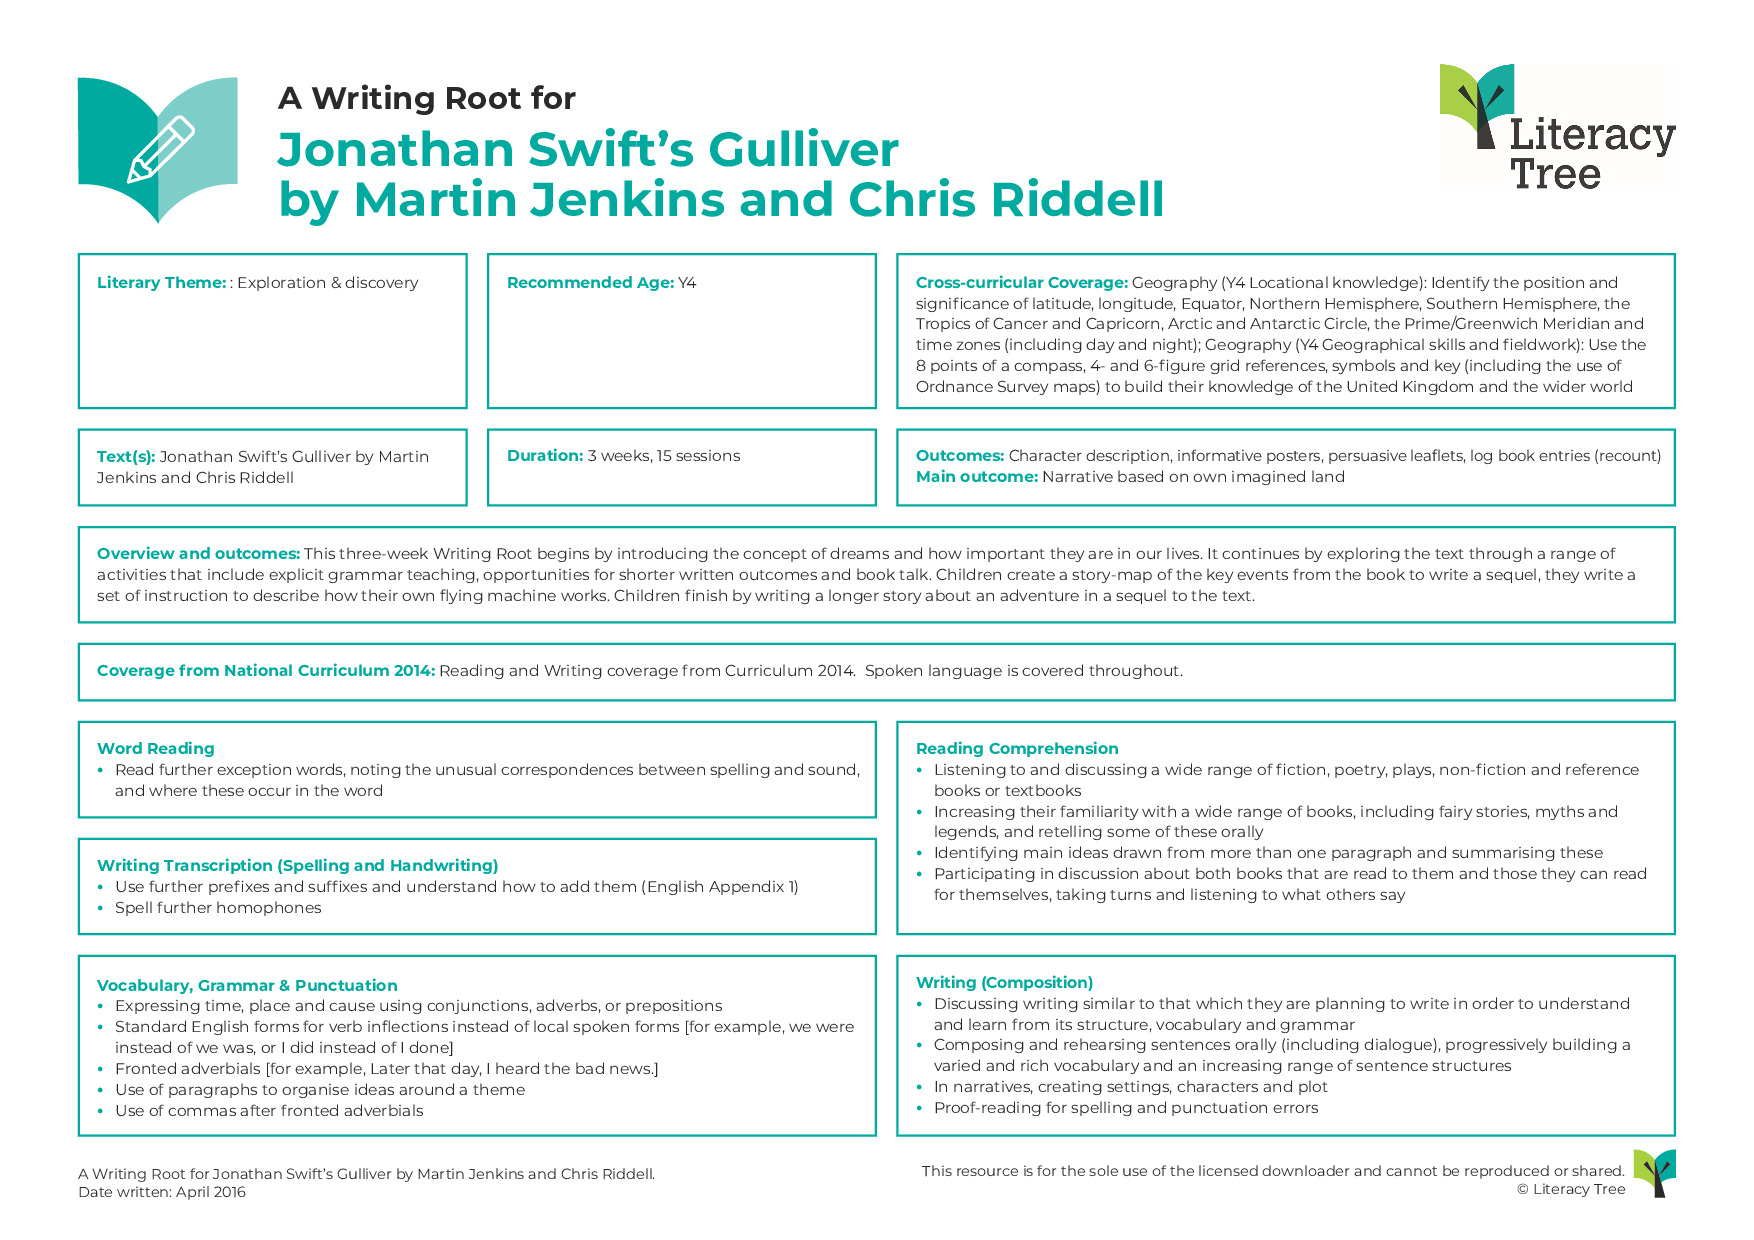 A Writing Root for Jonathan Swift's Gulliver